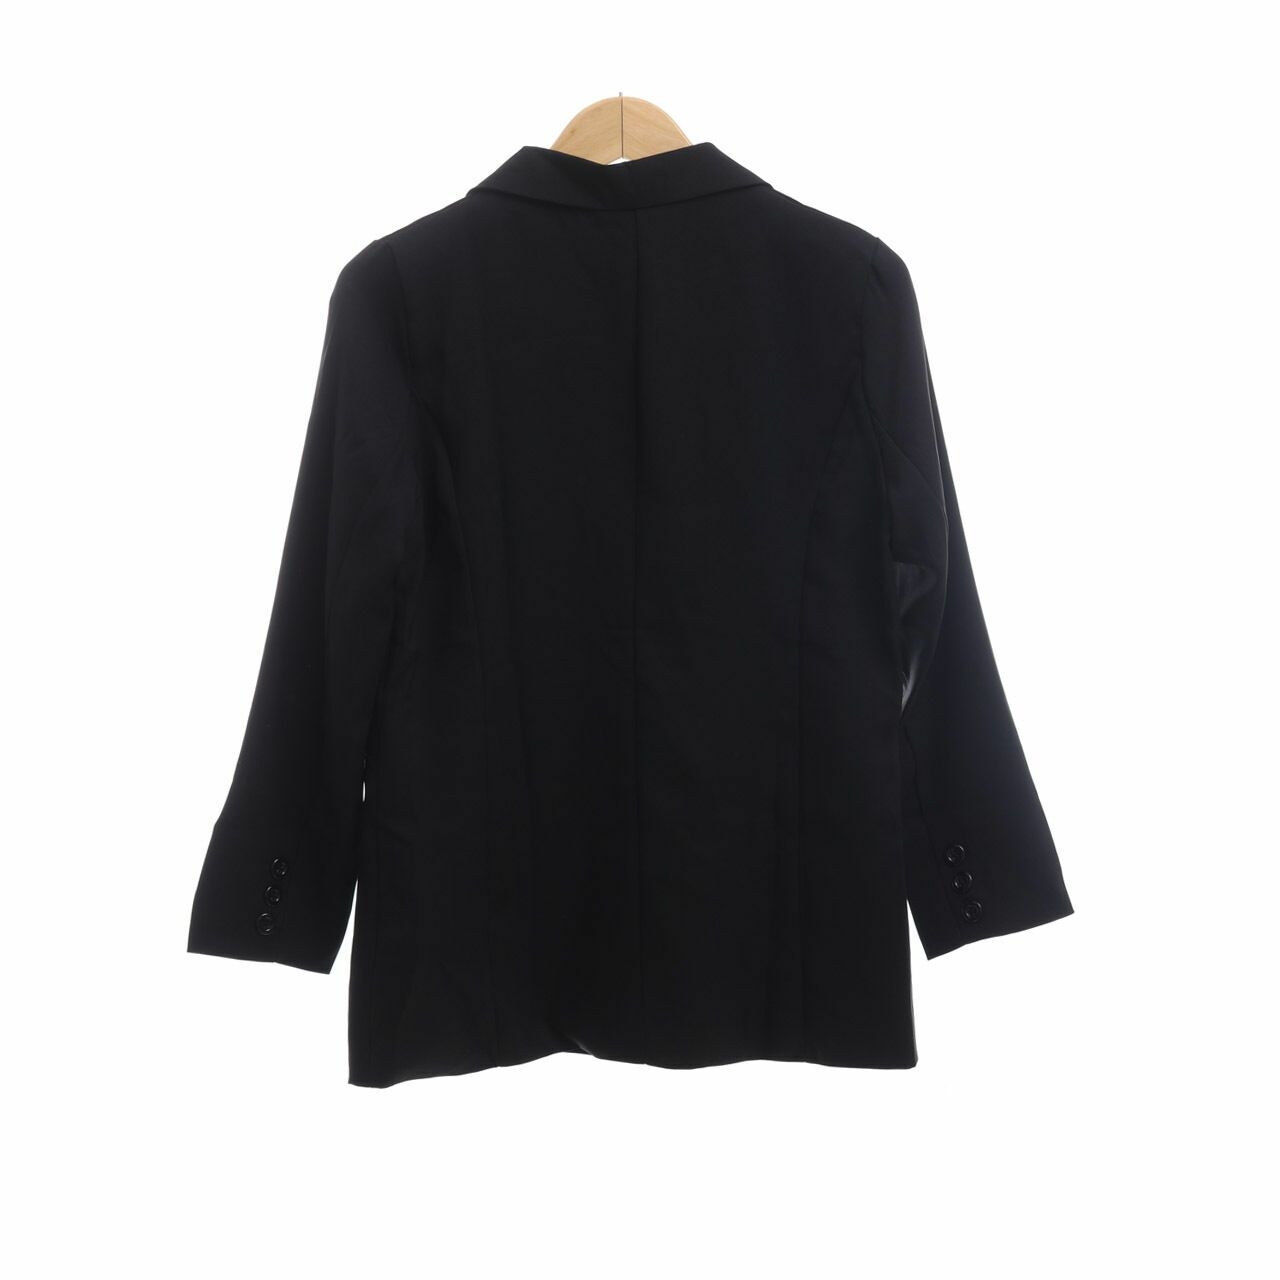 Day by Love and Flair Black Oversized Blazer